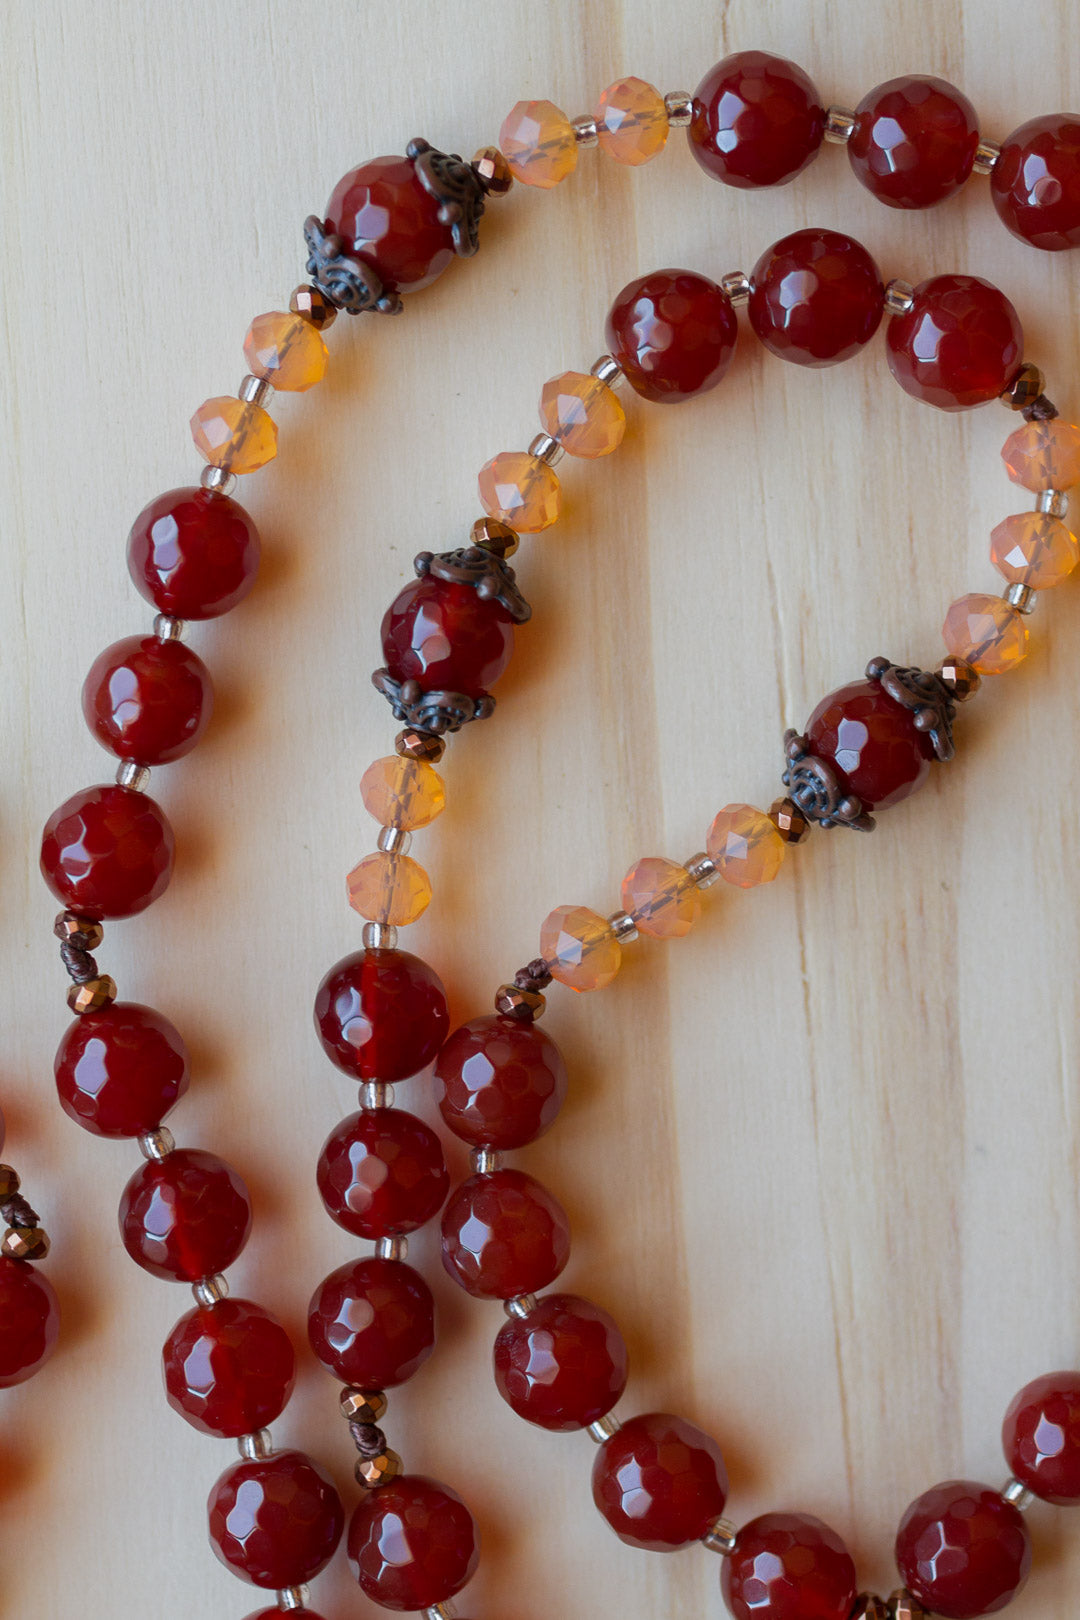 30" Dragon Vein Agate Beaded Pendant Necklace with Red Agate & Peach Crystal Beads